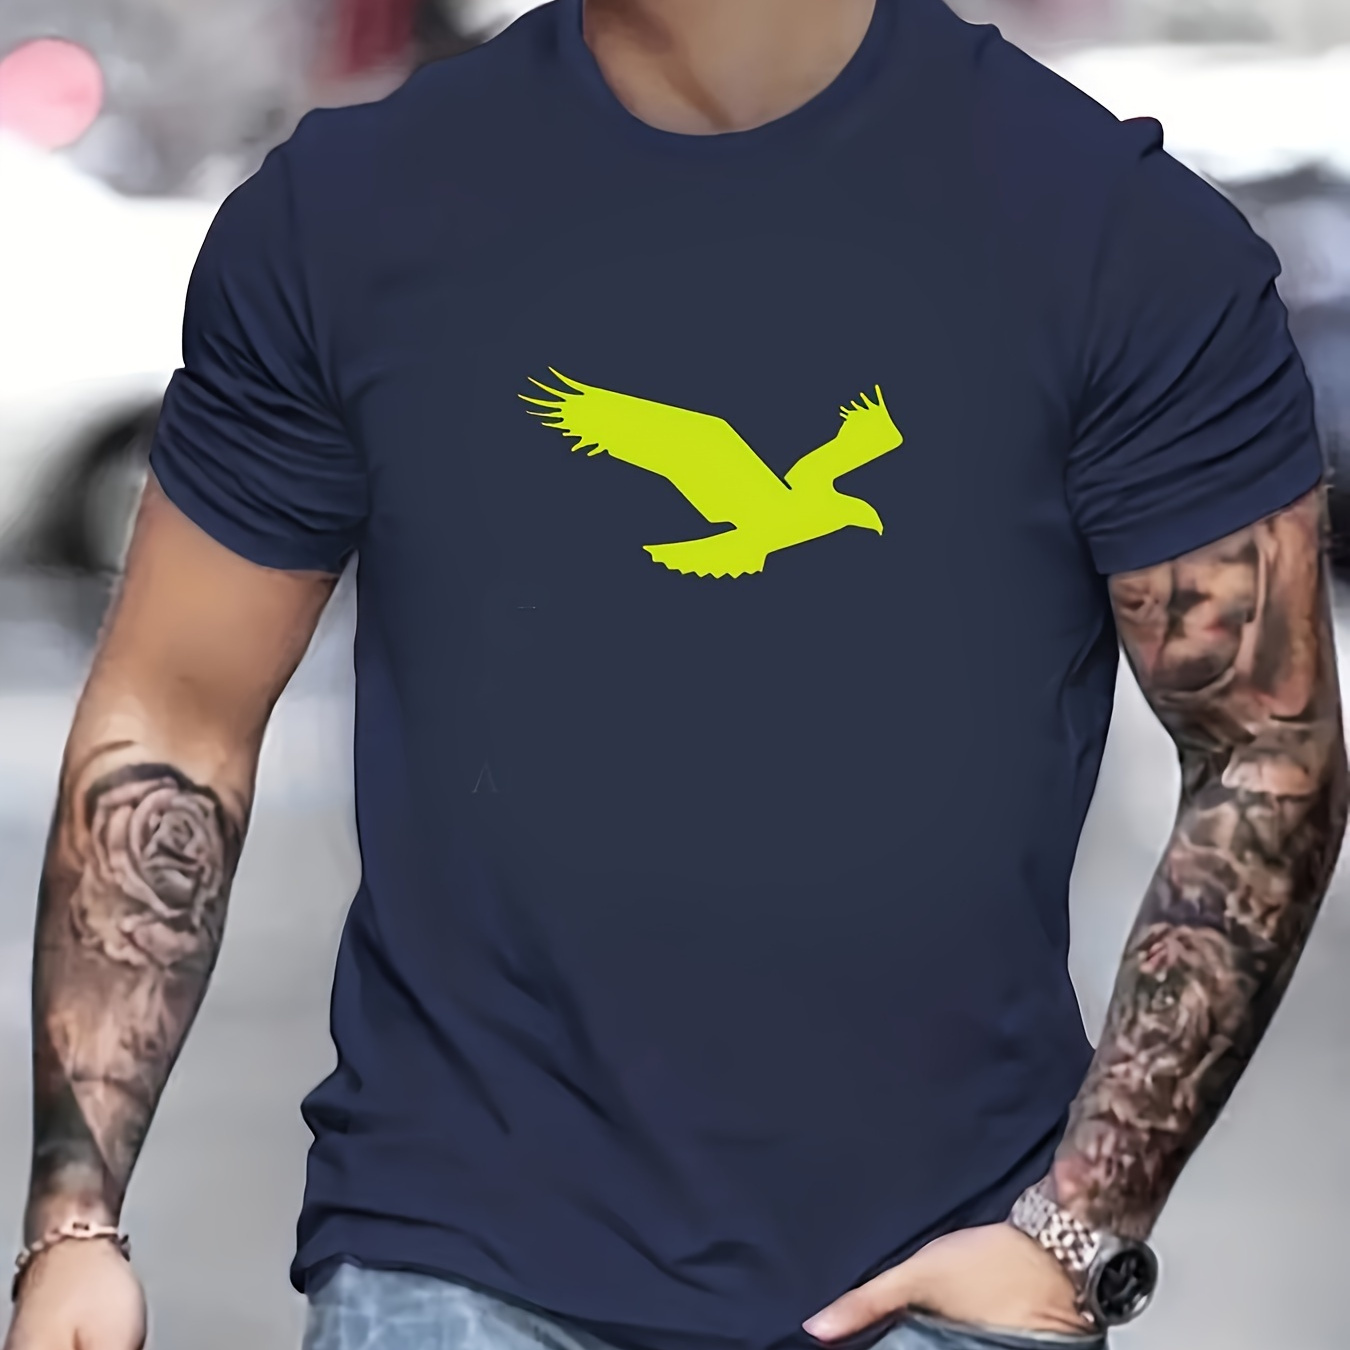 

Eagle Print T Shirt, Tees For Men, Casual Short Sleeve T-shirt For Summer